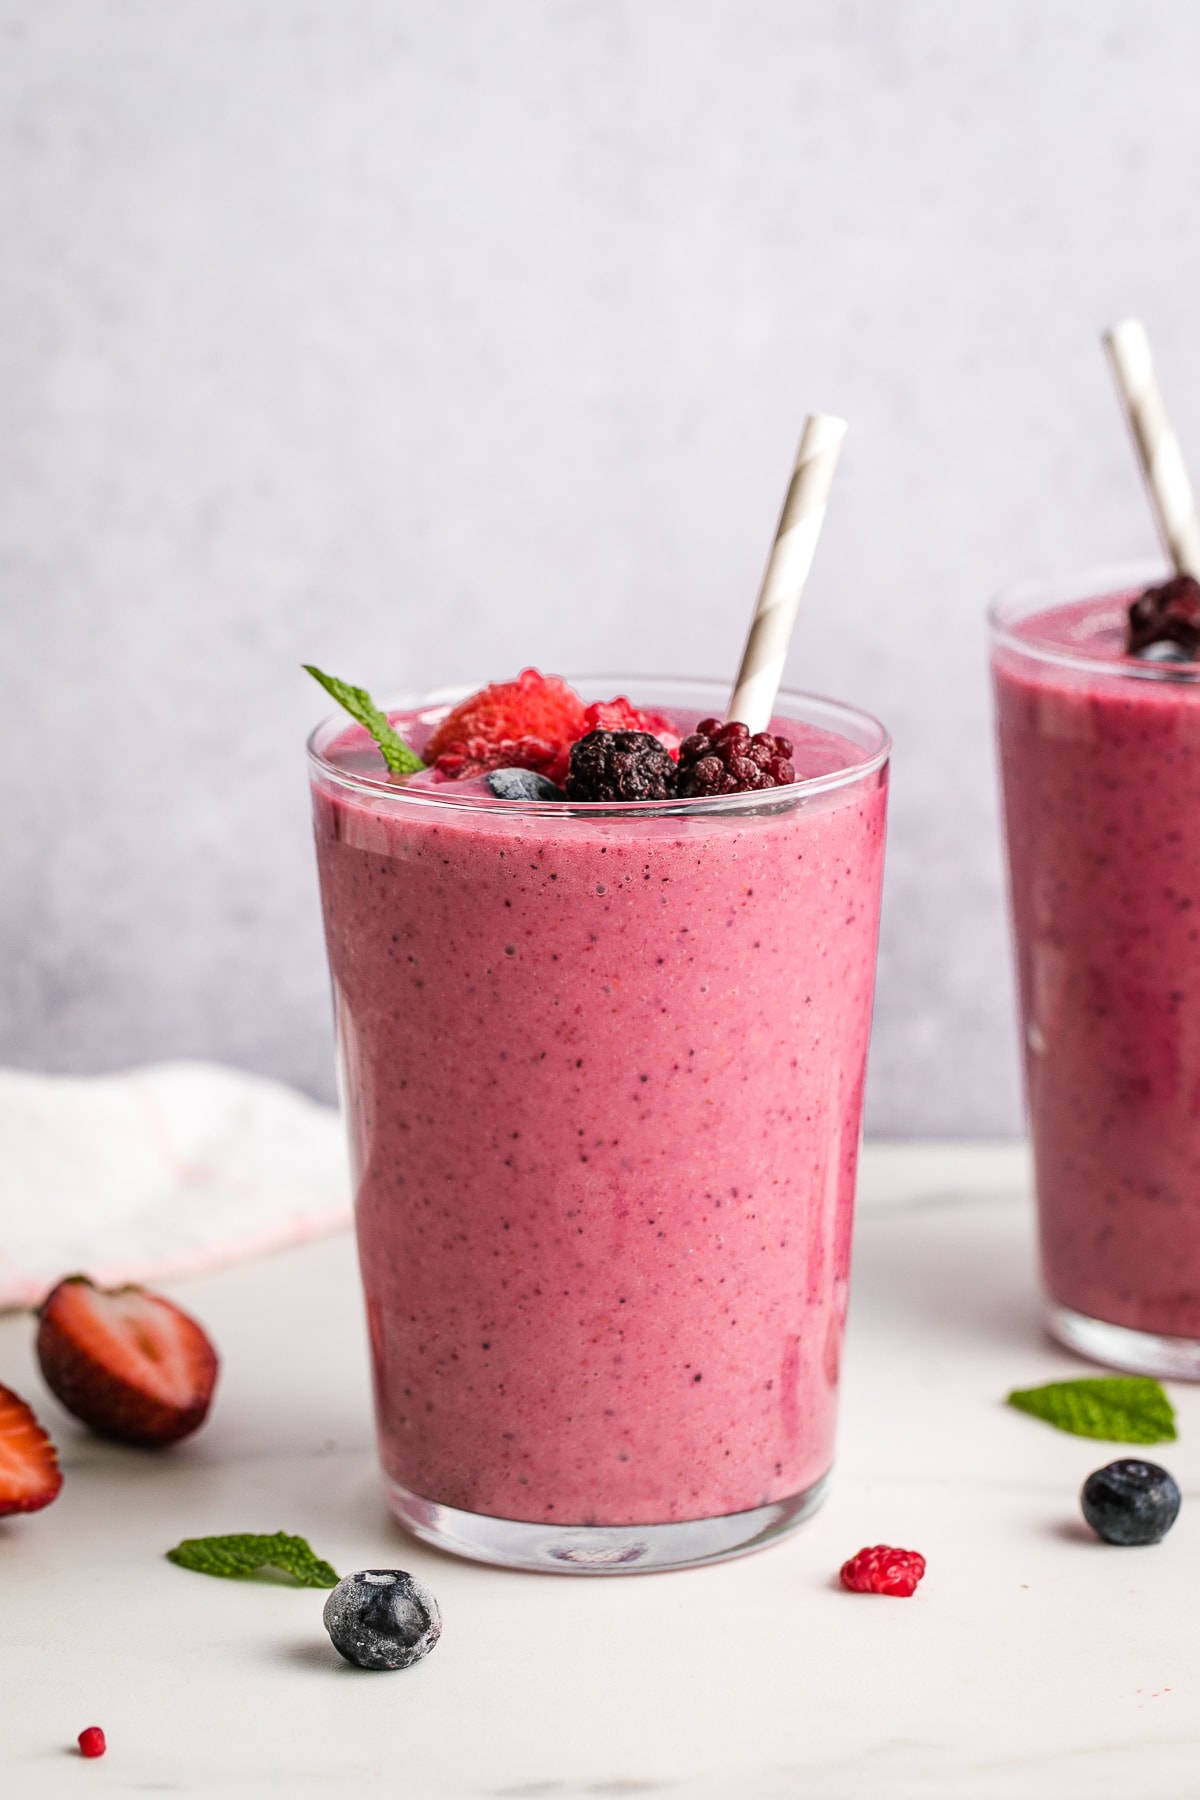 head on view of healthy mixed berry yogurt smoothie in a glass with straw and items surrounding.